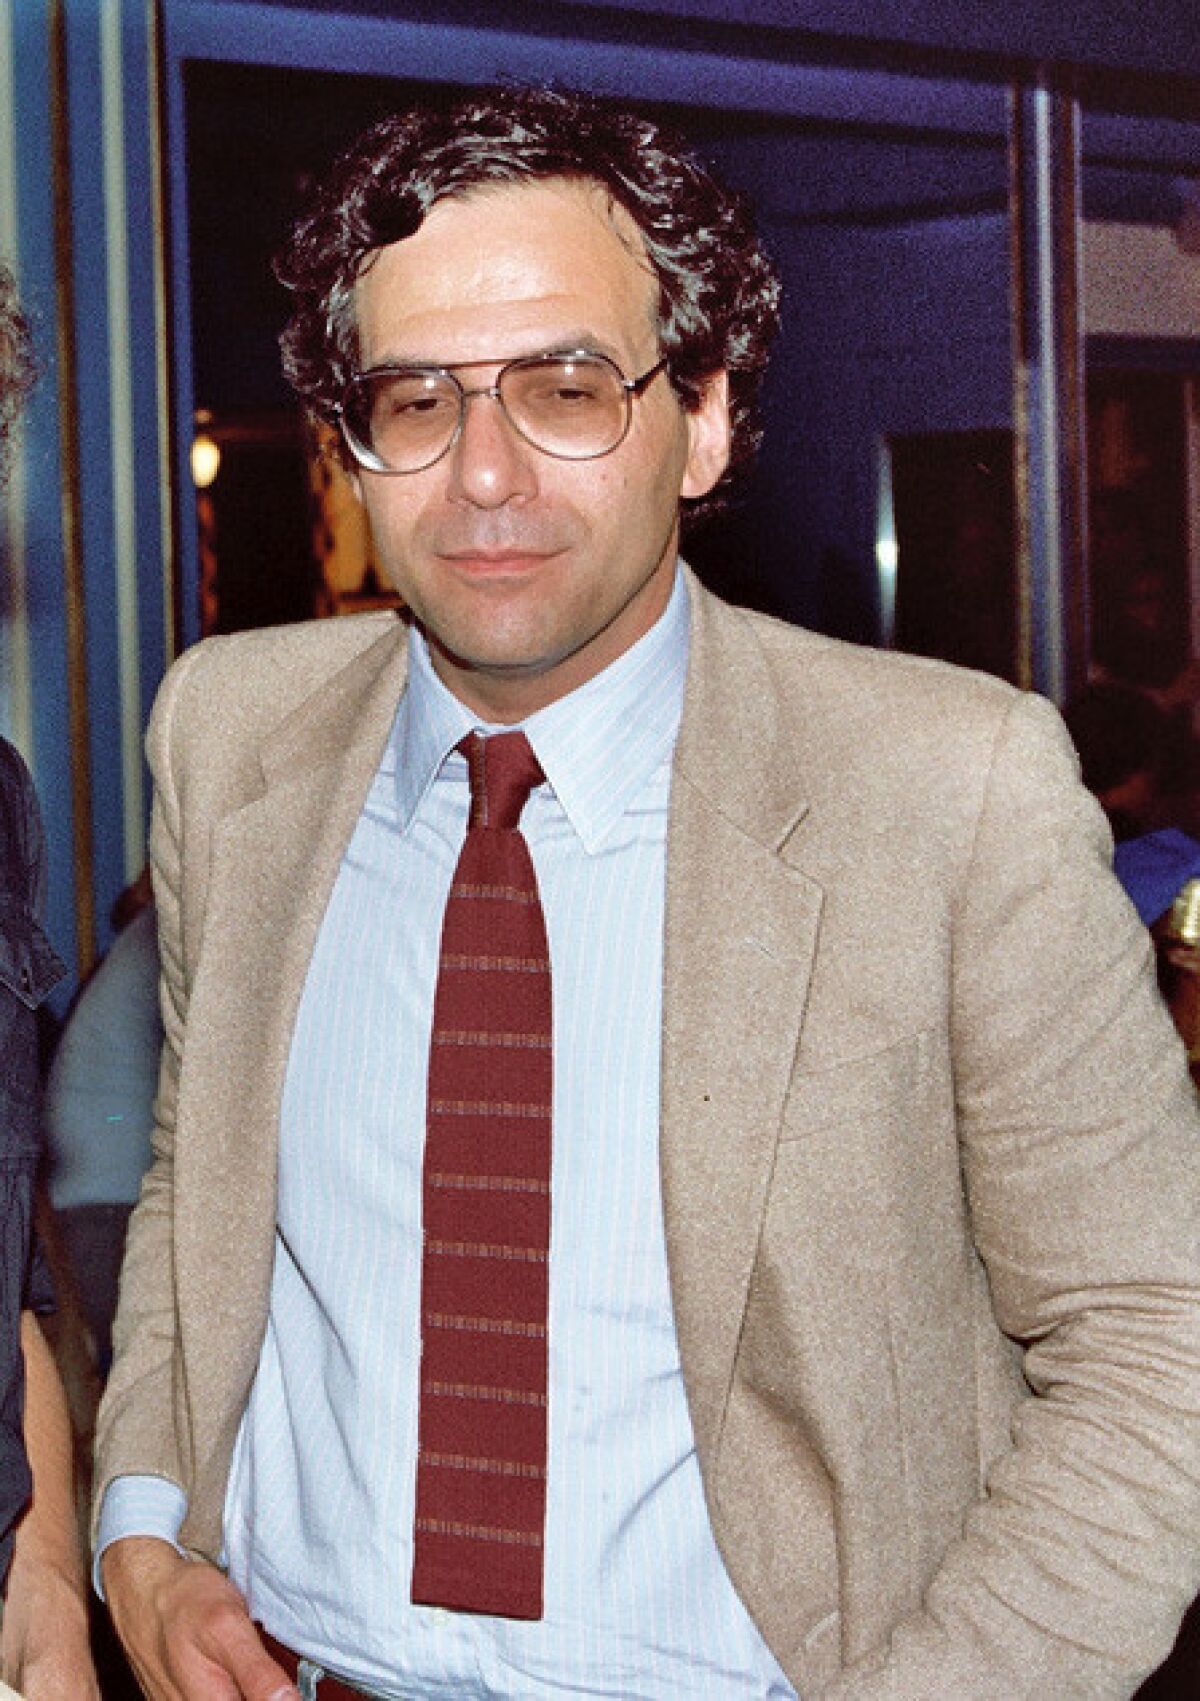 Steve Gerber (1947–2008) at the 1982 San Diego Comic Con (today called Comic–Con International).